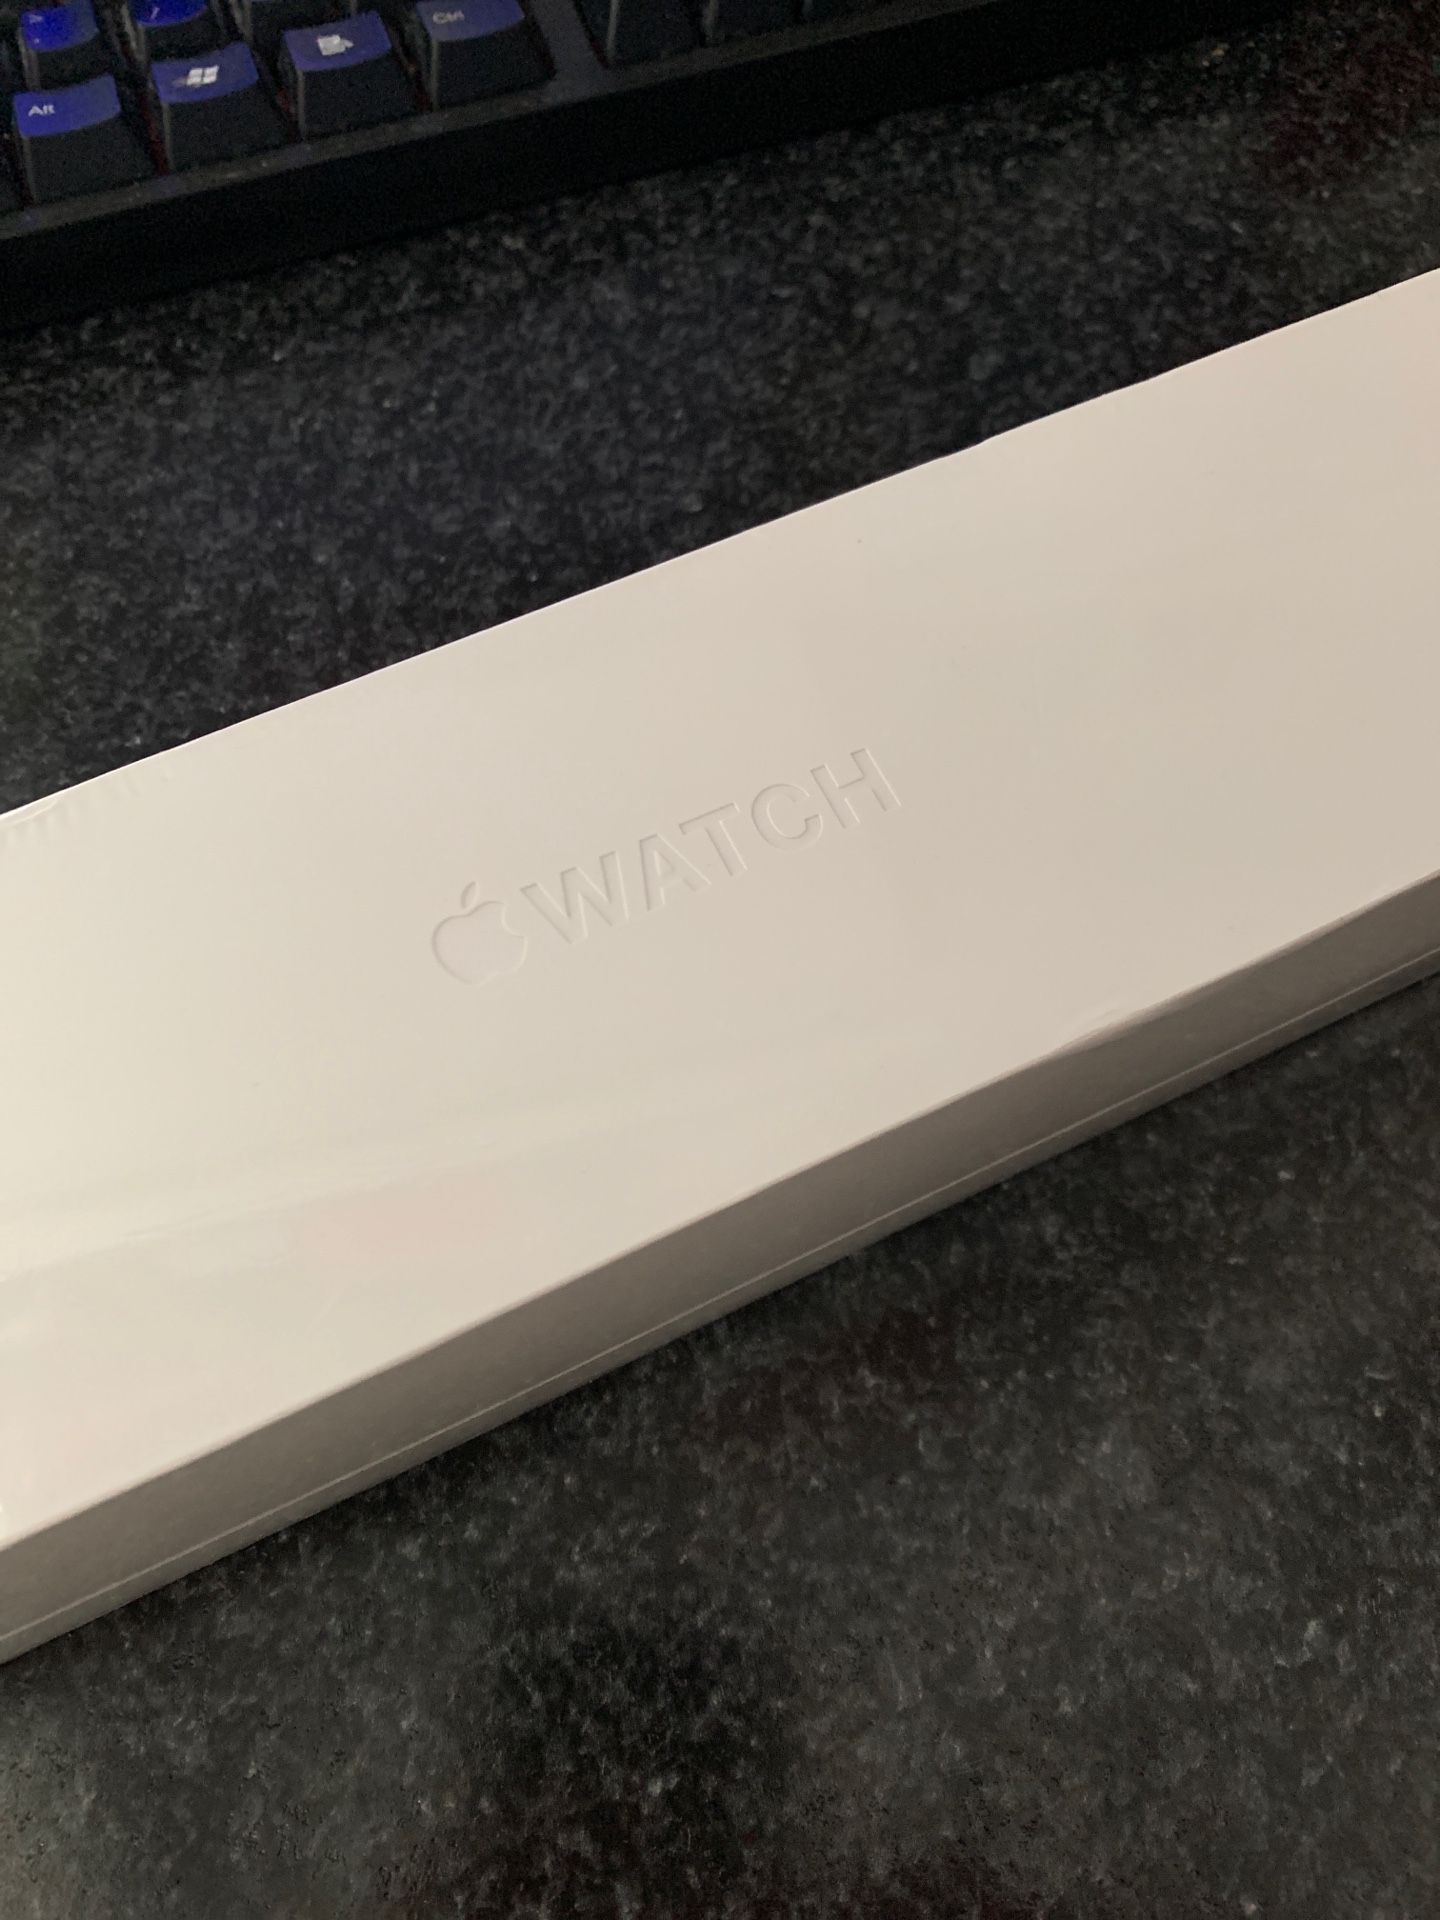 Apple watch series 4, Space gray with GPS + Cellular